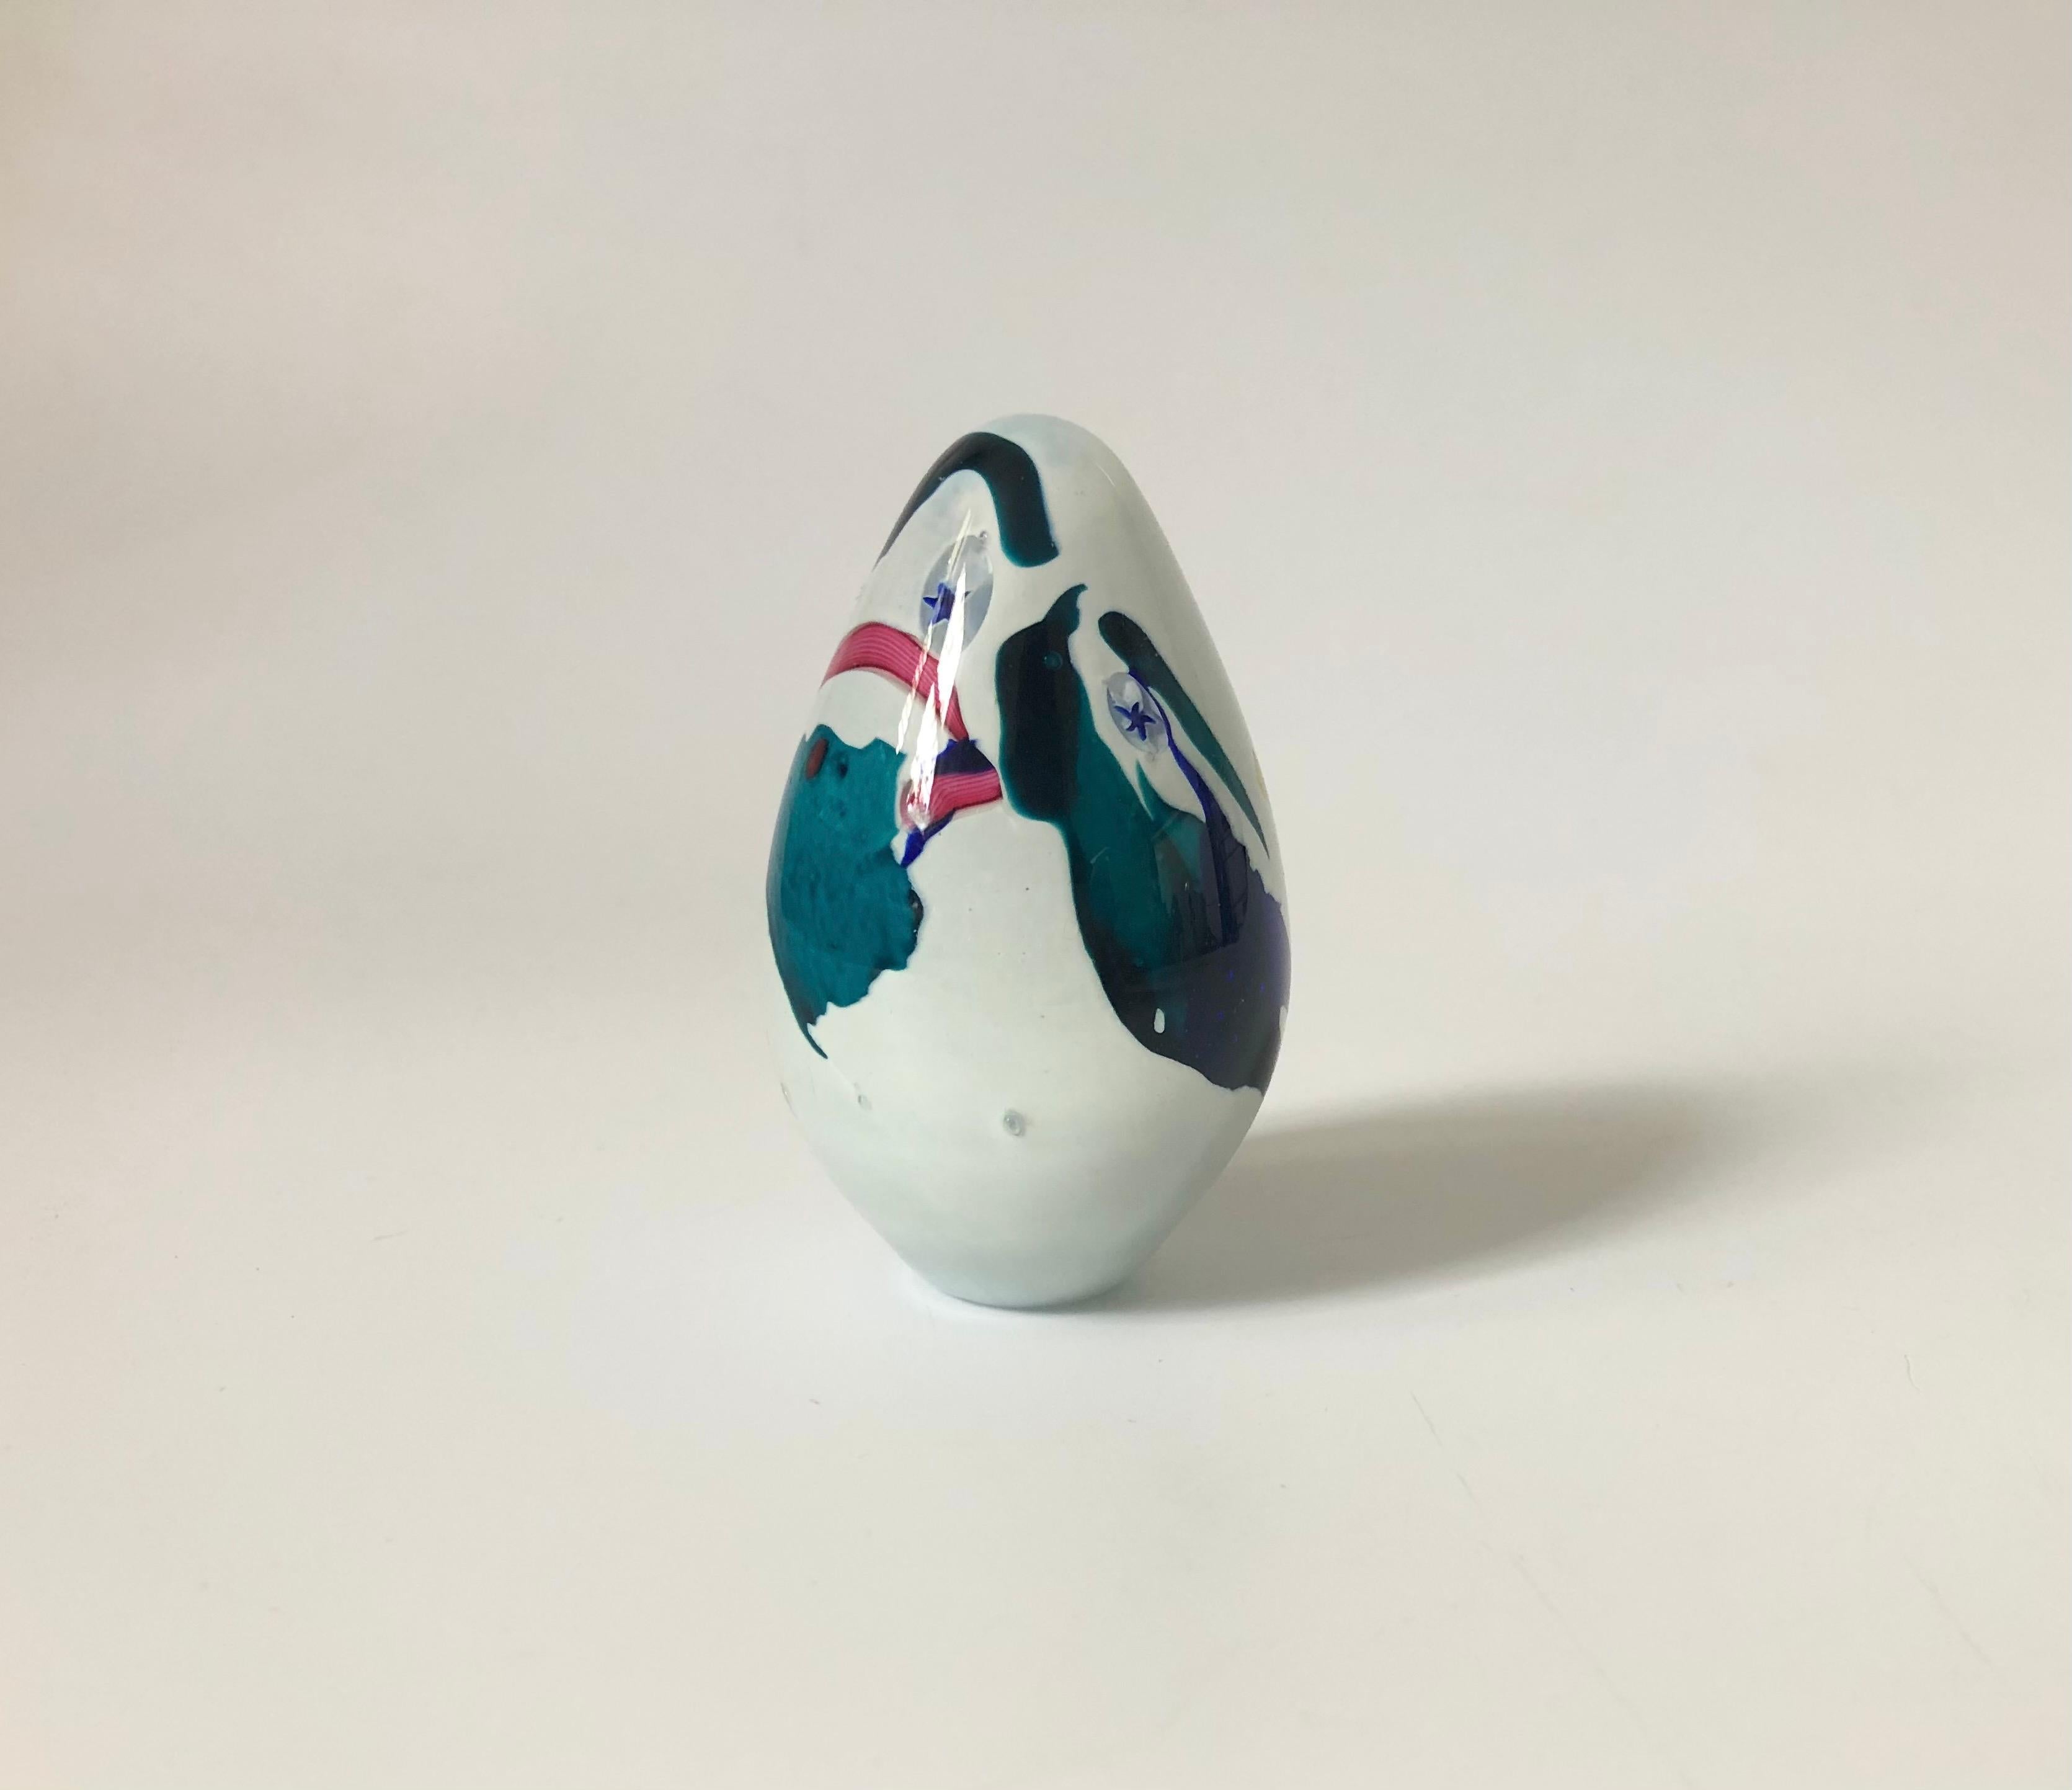 A vintage egg shaped art glass paperweight, made in 1994 by Glass Eye Studio. Opaque white color to the interior with abstract shapes of colorful glass throughout and some small stars embedded in the glass. Marked on the base 